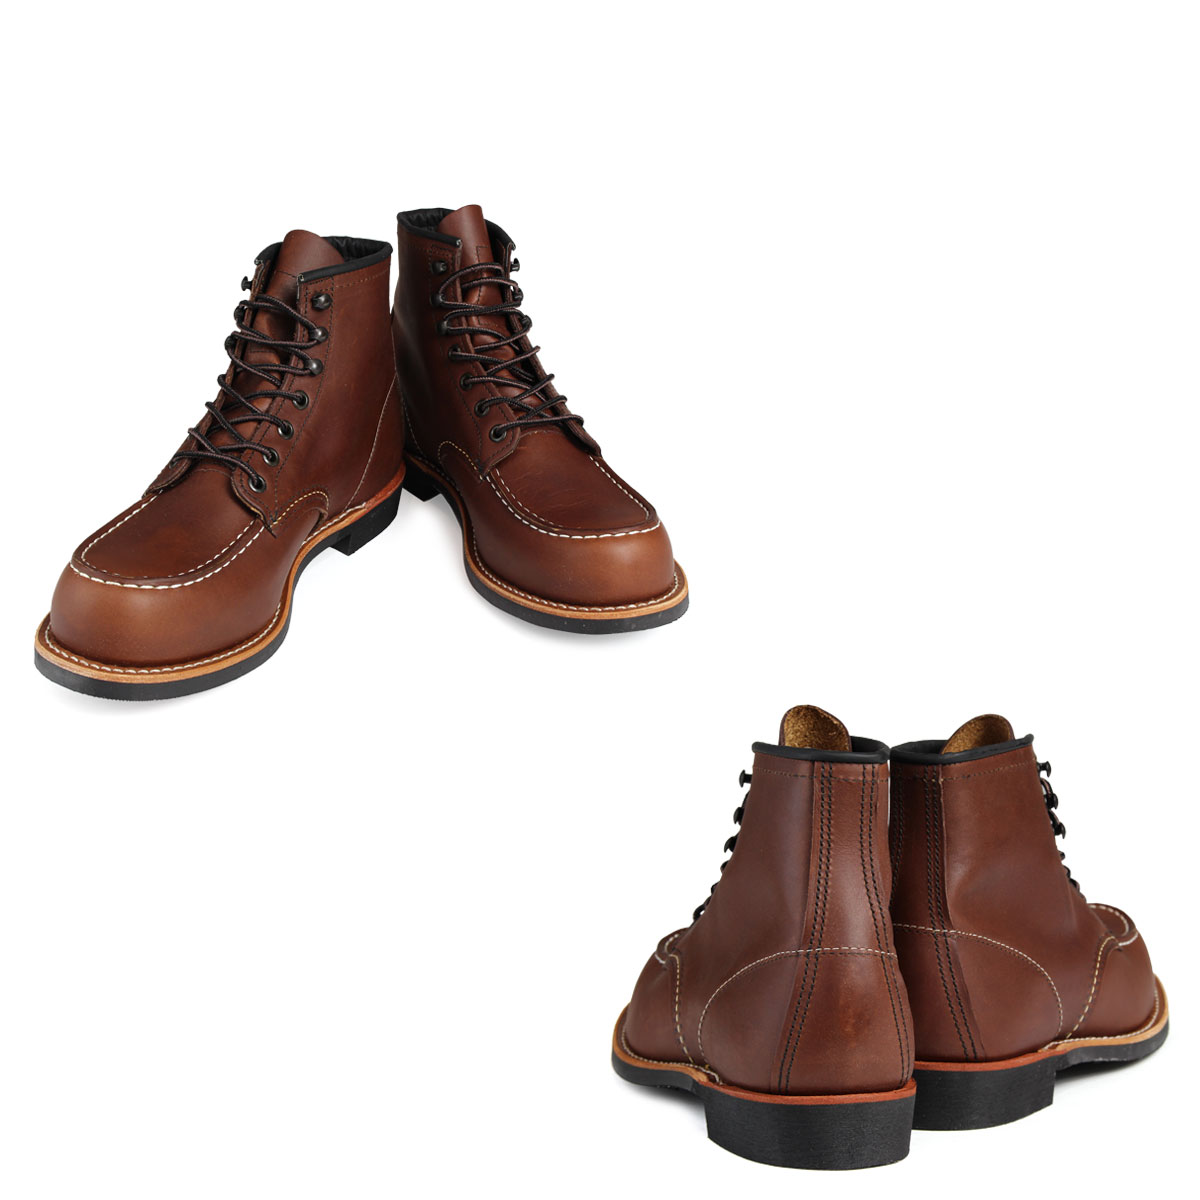 red wing boots online